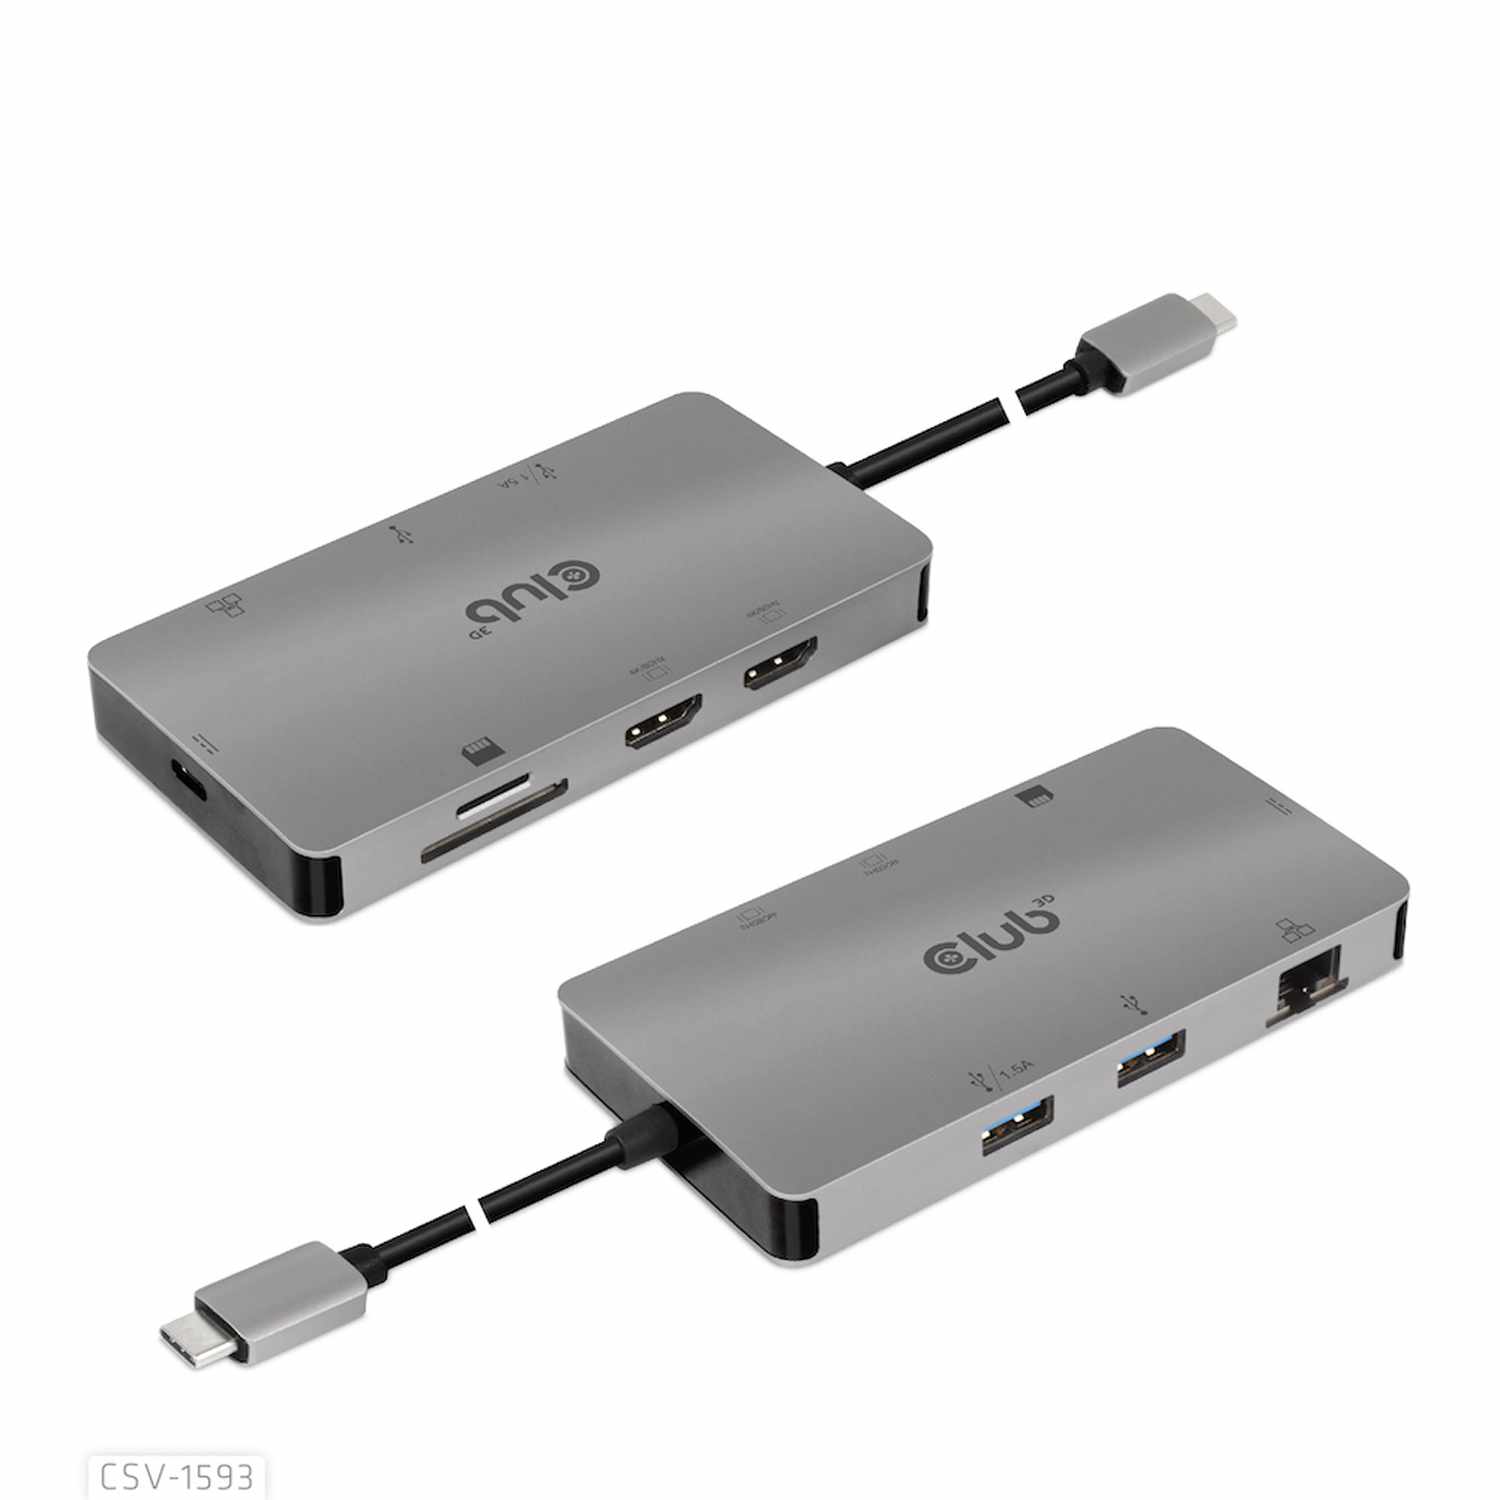 Club3D CSV1593 USB-C 3.2 Gen 1 8-in-1 Hub with 2X HDMI/2X USB/RJ45/SD/Micro SD Card Slots and USB-C Female Port